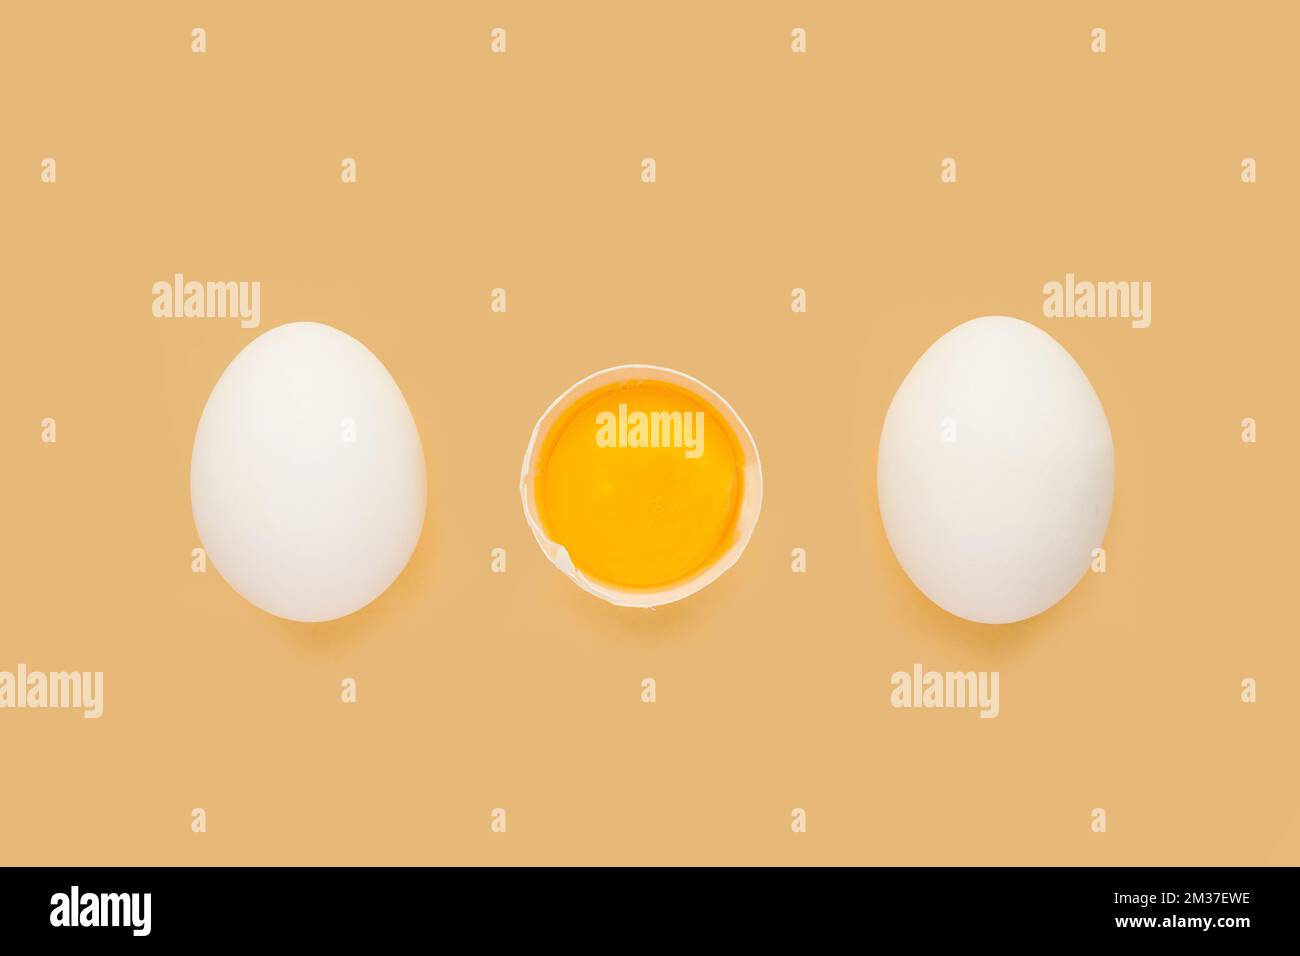 Whole chicken Eggs and cracked half with yolk on yellow background. Minimalism Stock Photo